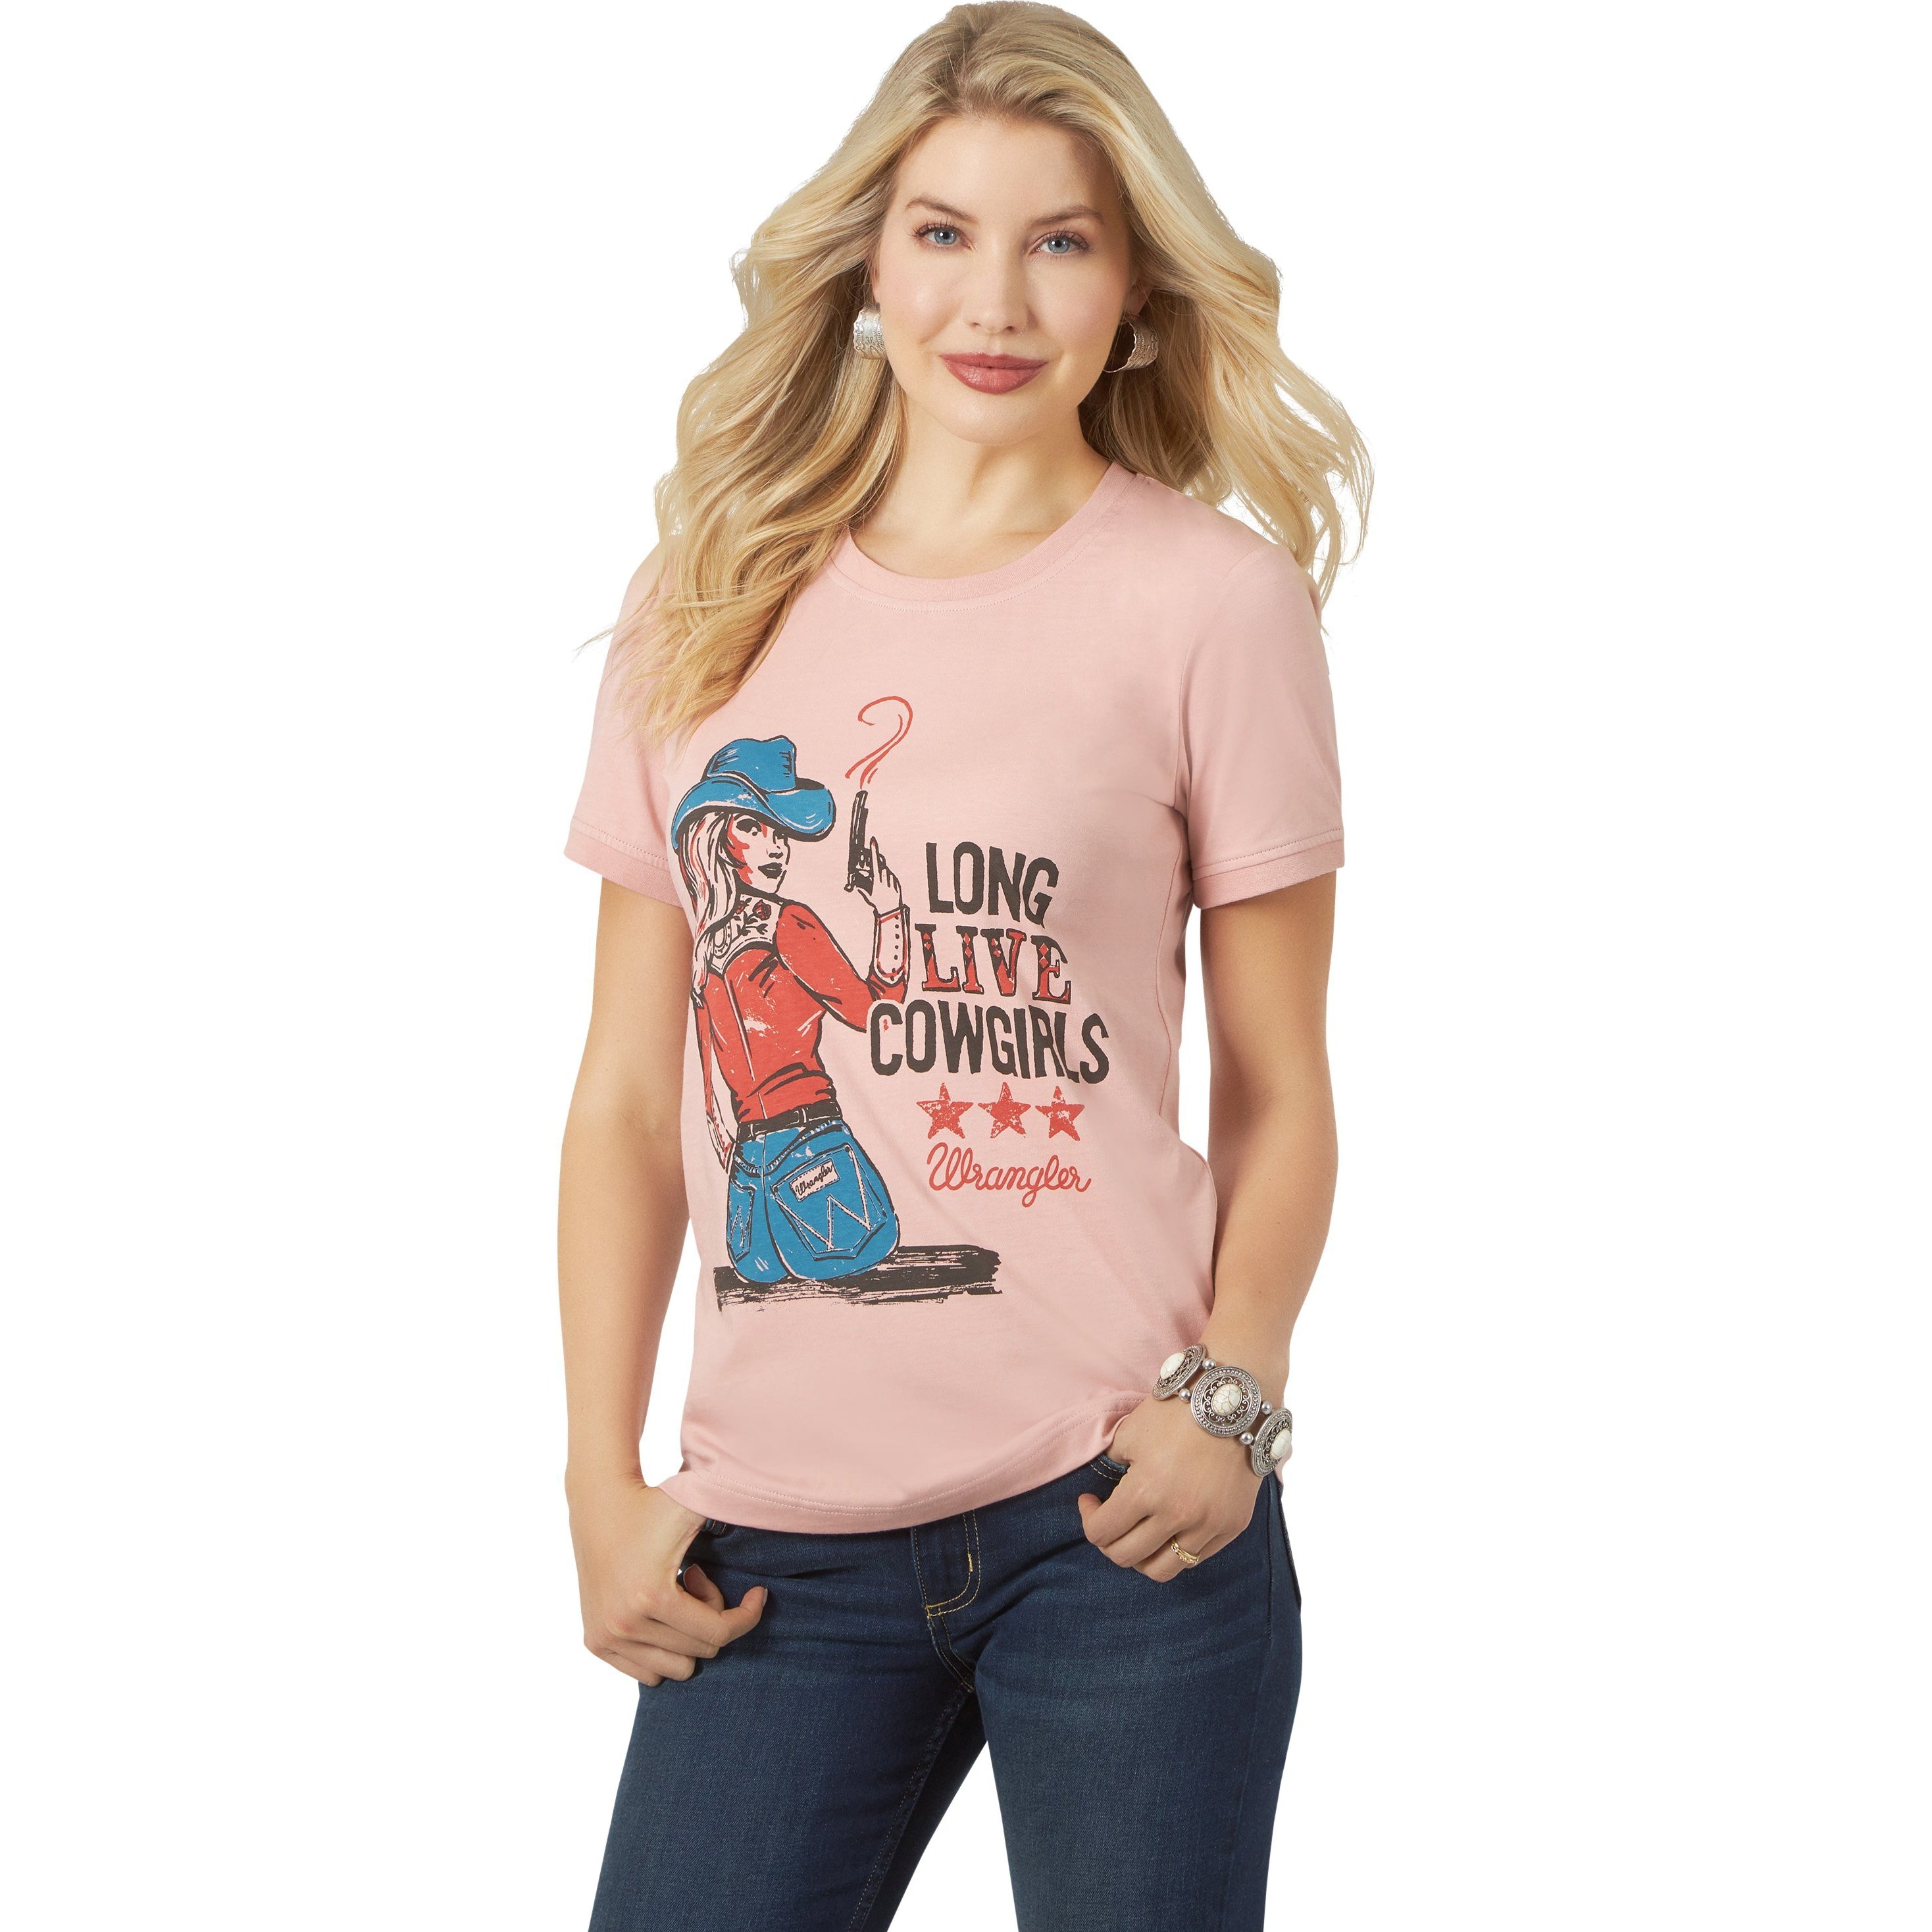 Wrangler Women's Long Live Cowgirls Tee – West 20 Saddle Co.